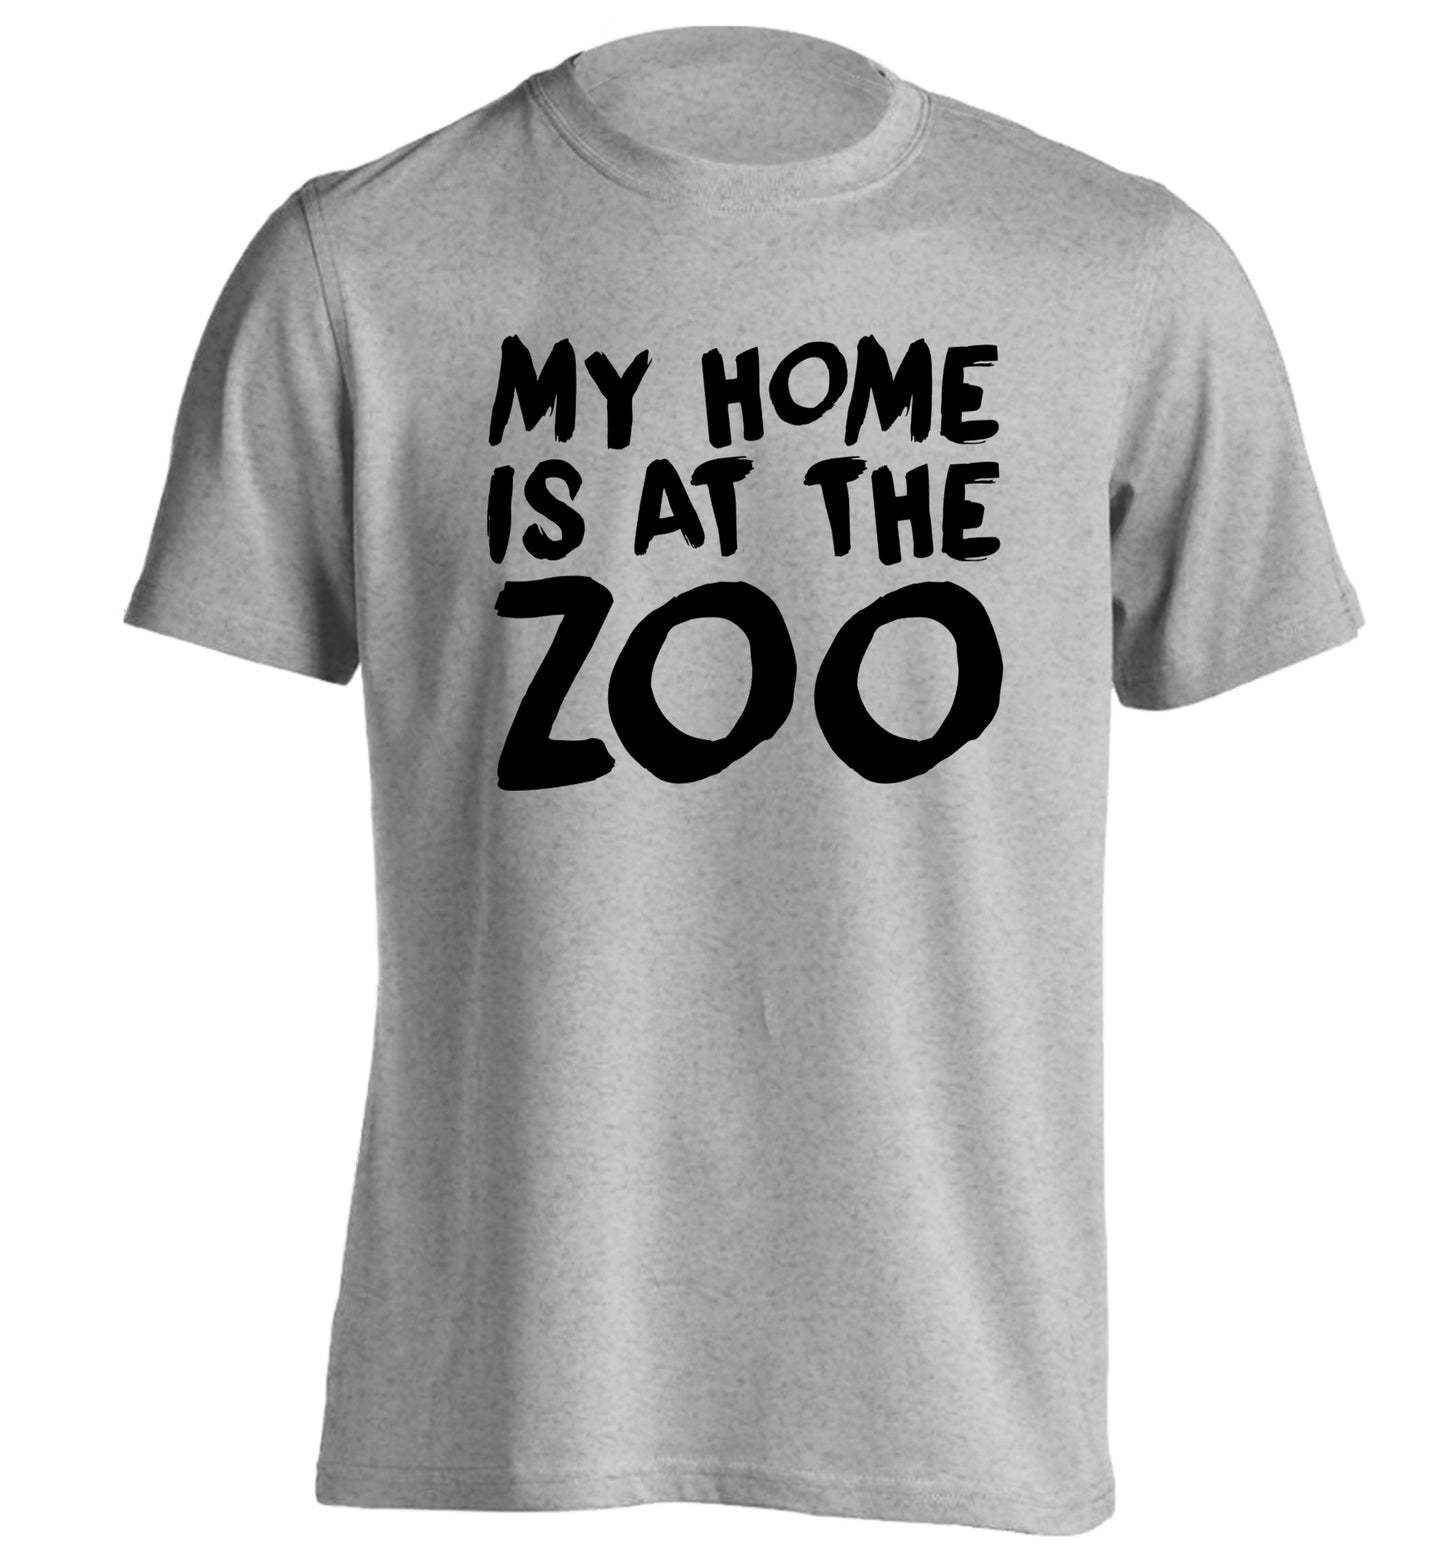 My home is at the zoo adults unisex grey Tshirt 2XL